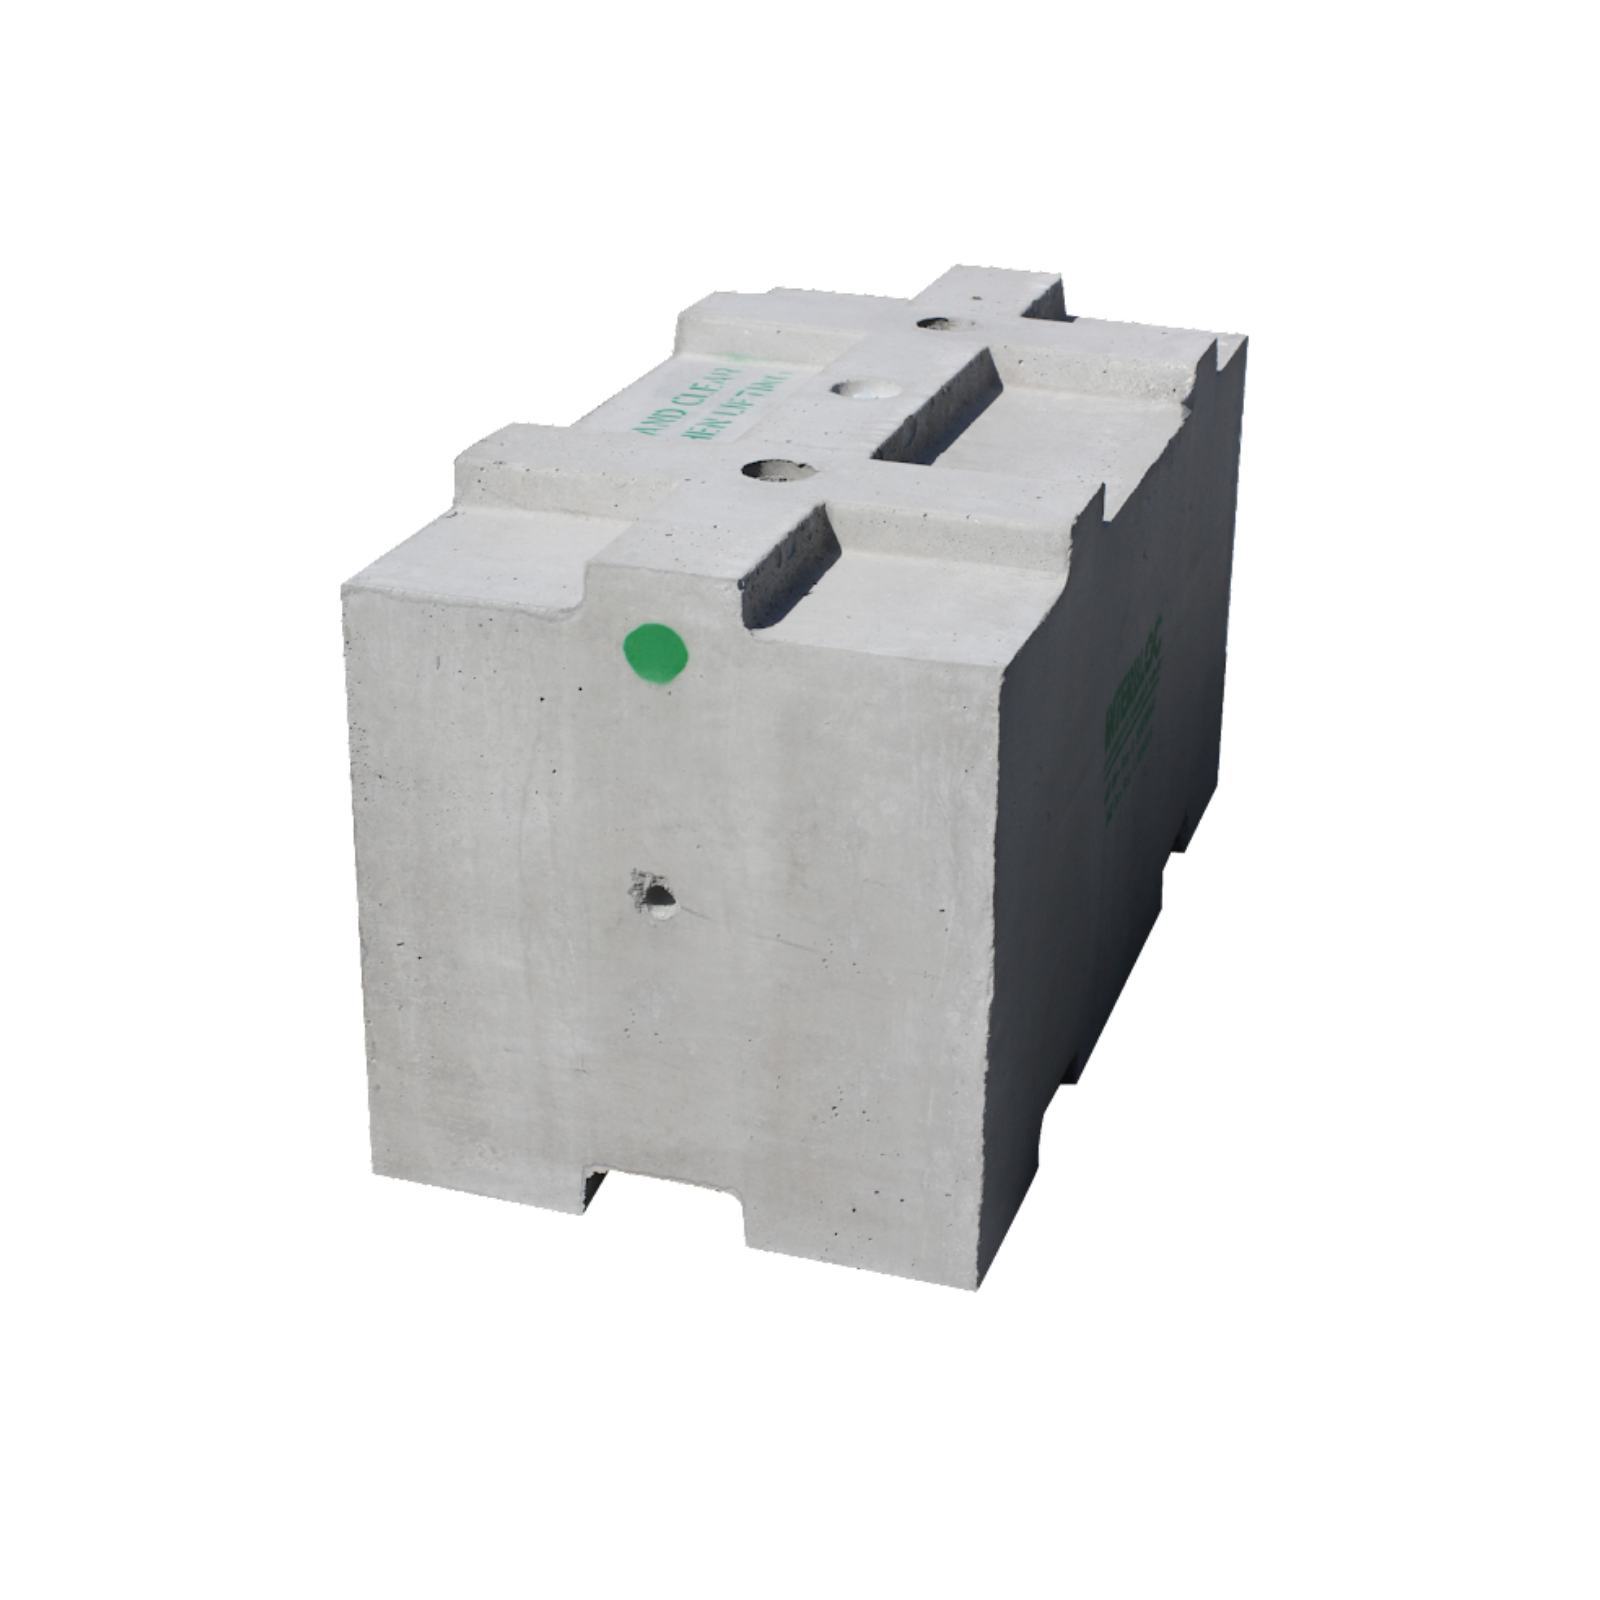 Concrete Weights - Durable Concrete Counter Weights